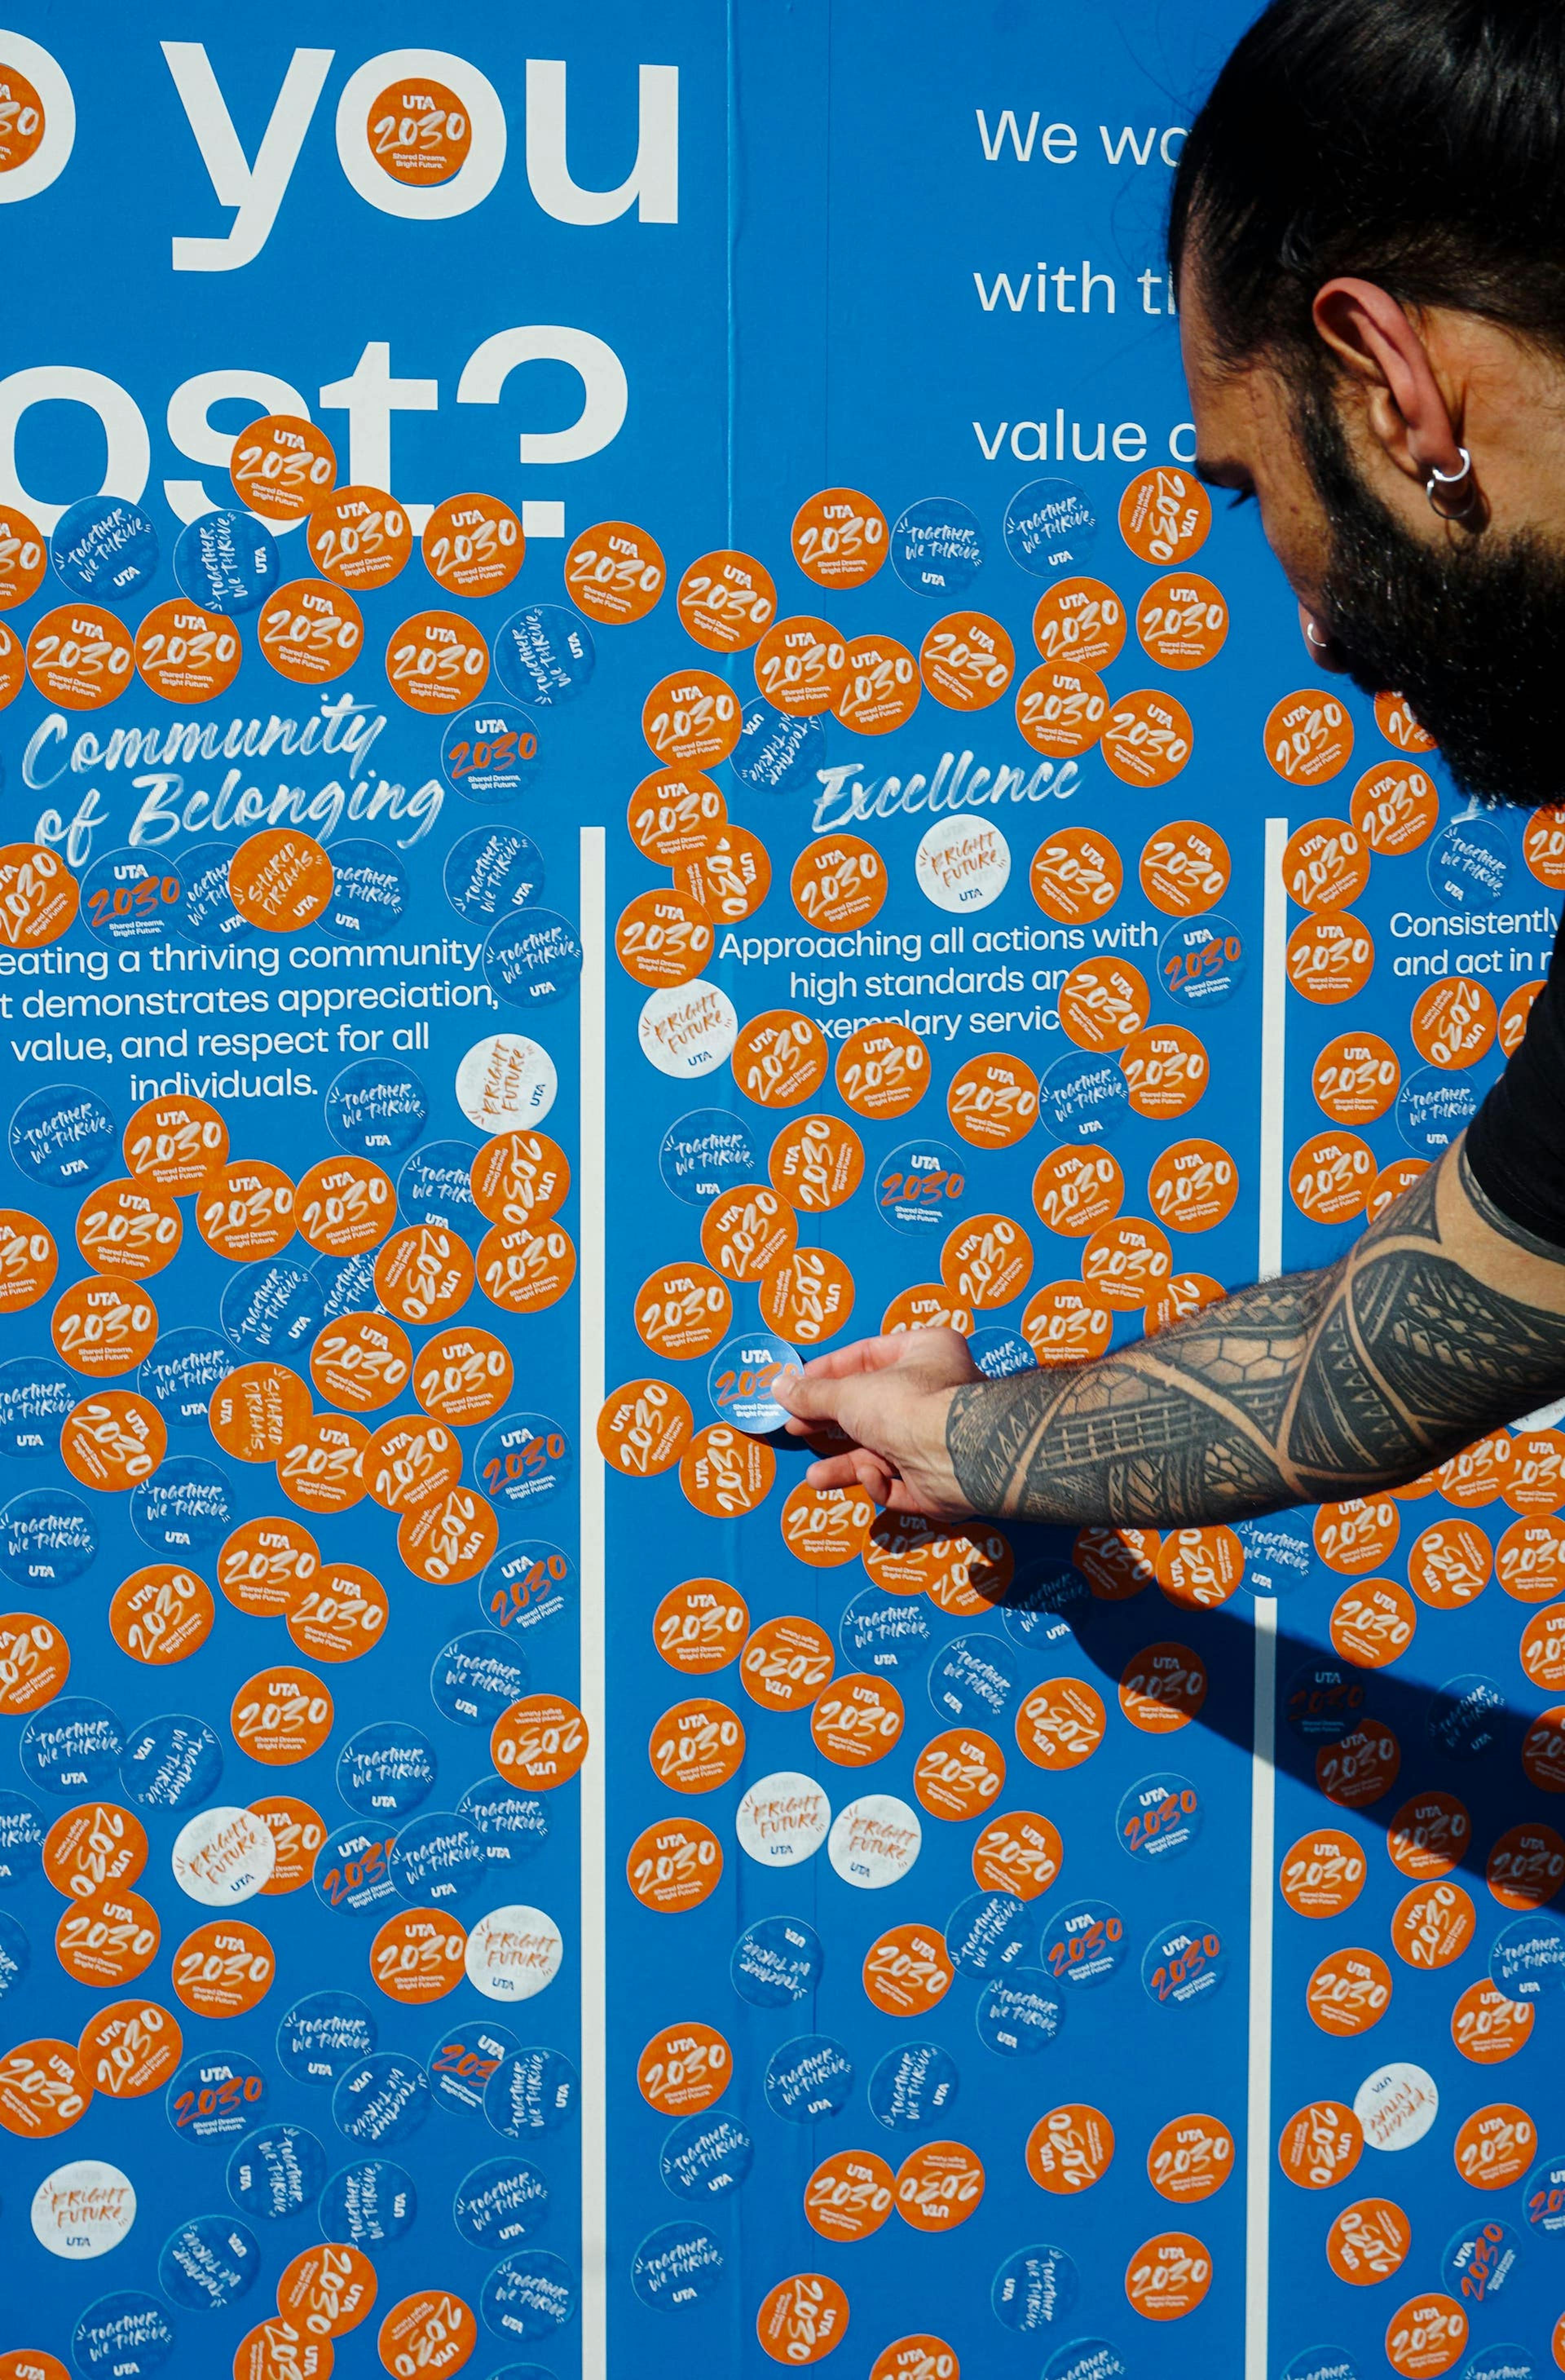 A person is placing an orange "UTA 2030" sticker on a blue wall filled with similar stickers, promoting community and excellence.